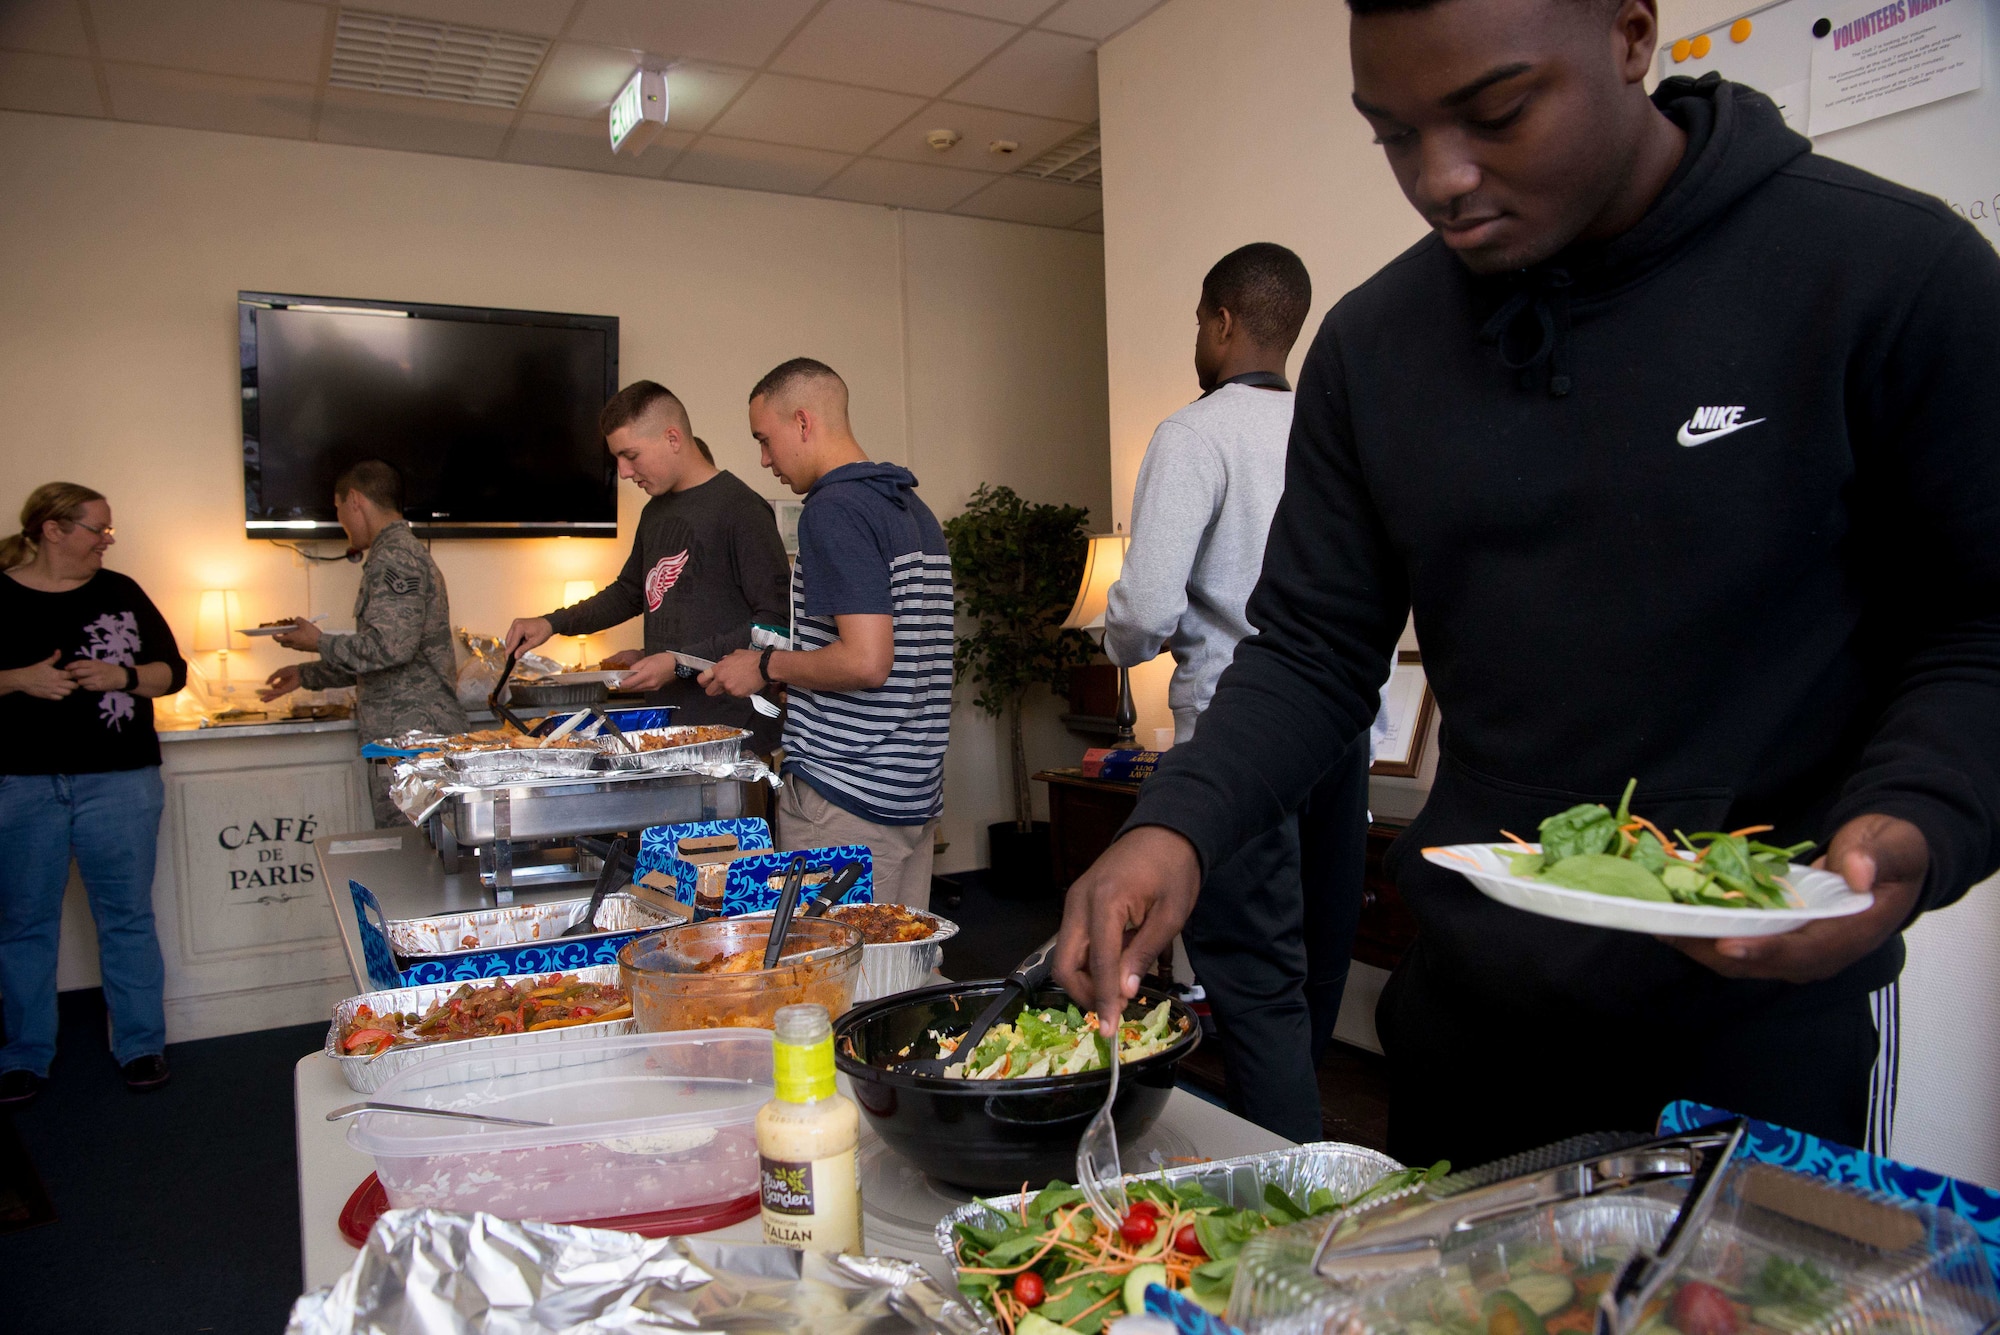 Airmen participate in a Friday night free meal at Club 7 on Ramstein Air Base, June 10, 2017. Run by the 86th Airlift Wing Chapel, the Ramstein Club 7 offers junior enlisted Airmen a number of services, including free meals starting at 6:00 p.m. every Friday, and free resiliency trips that include activities like snowboarding and sky diving. (U.S. Air Force photo by Senior Airman Elizabeth Baker)